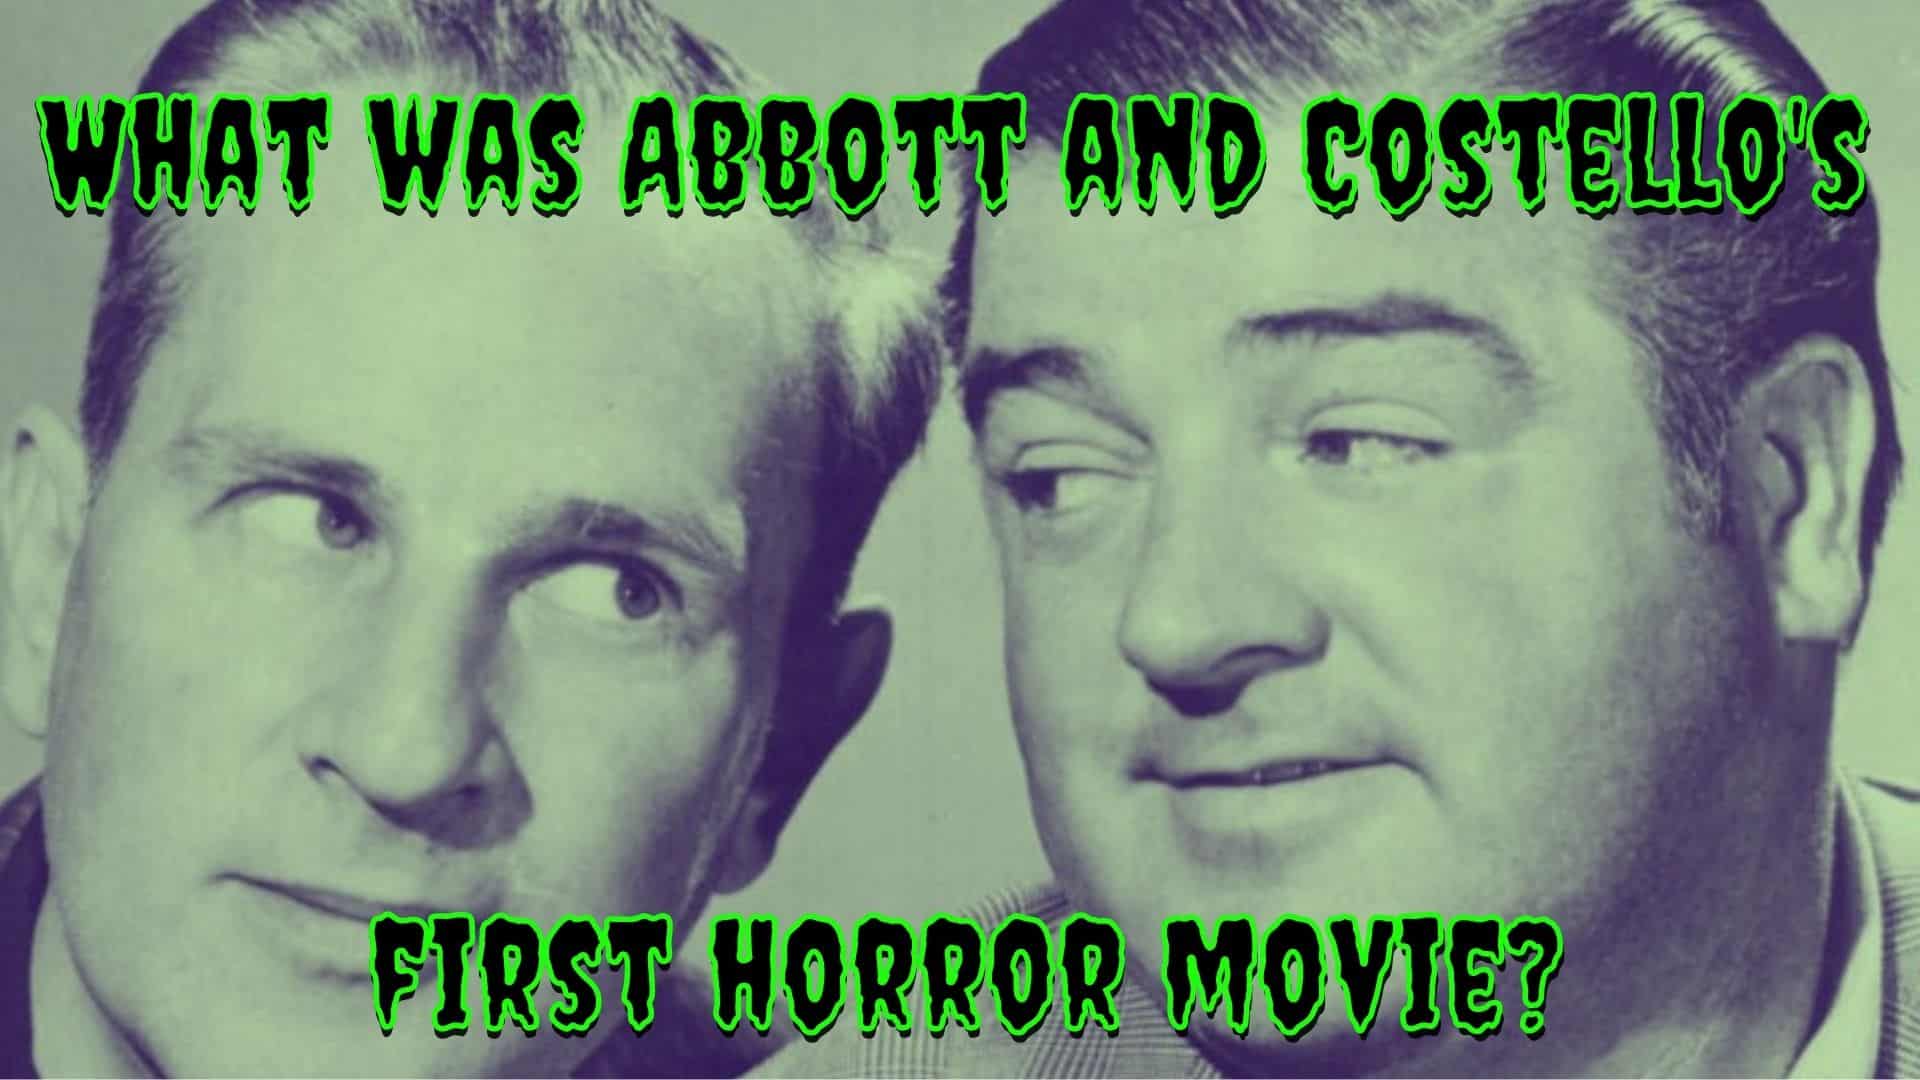 What was Abbott and Costello's First Horror Movie?